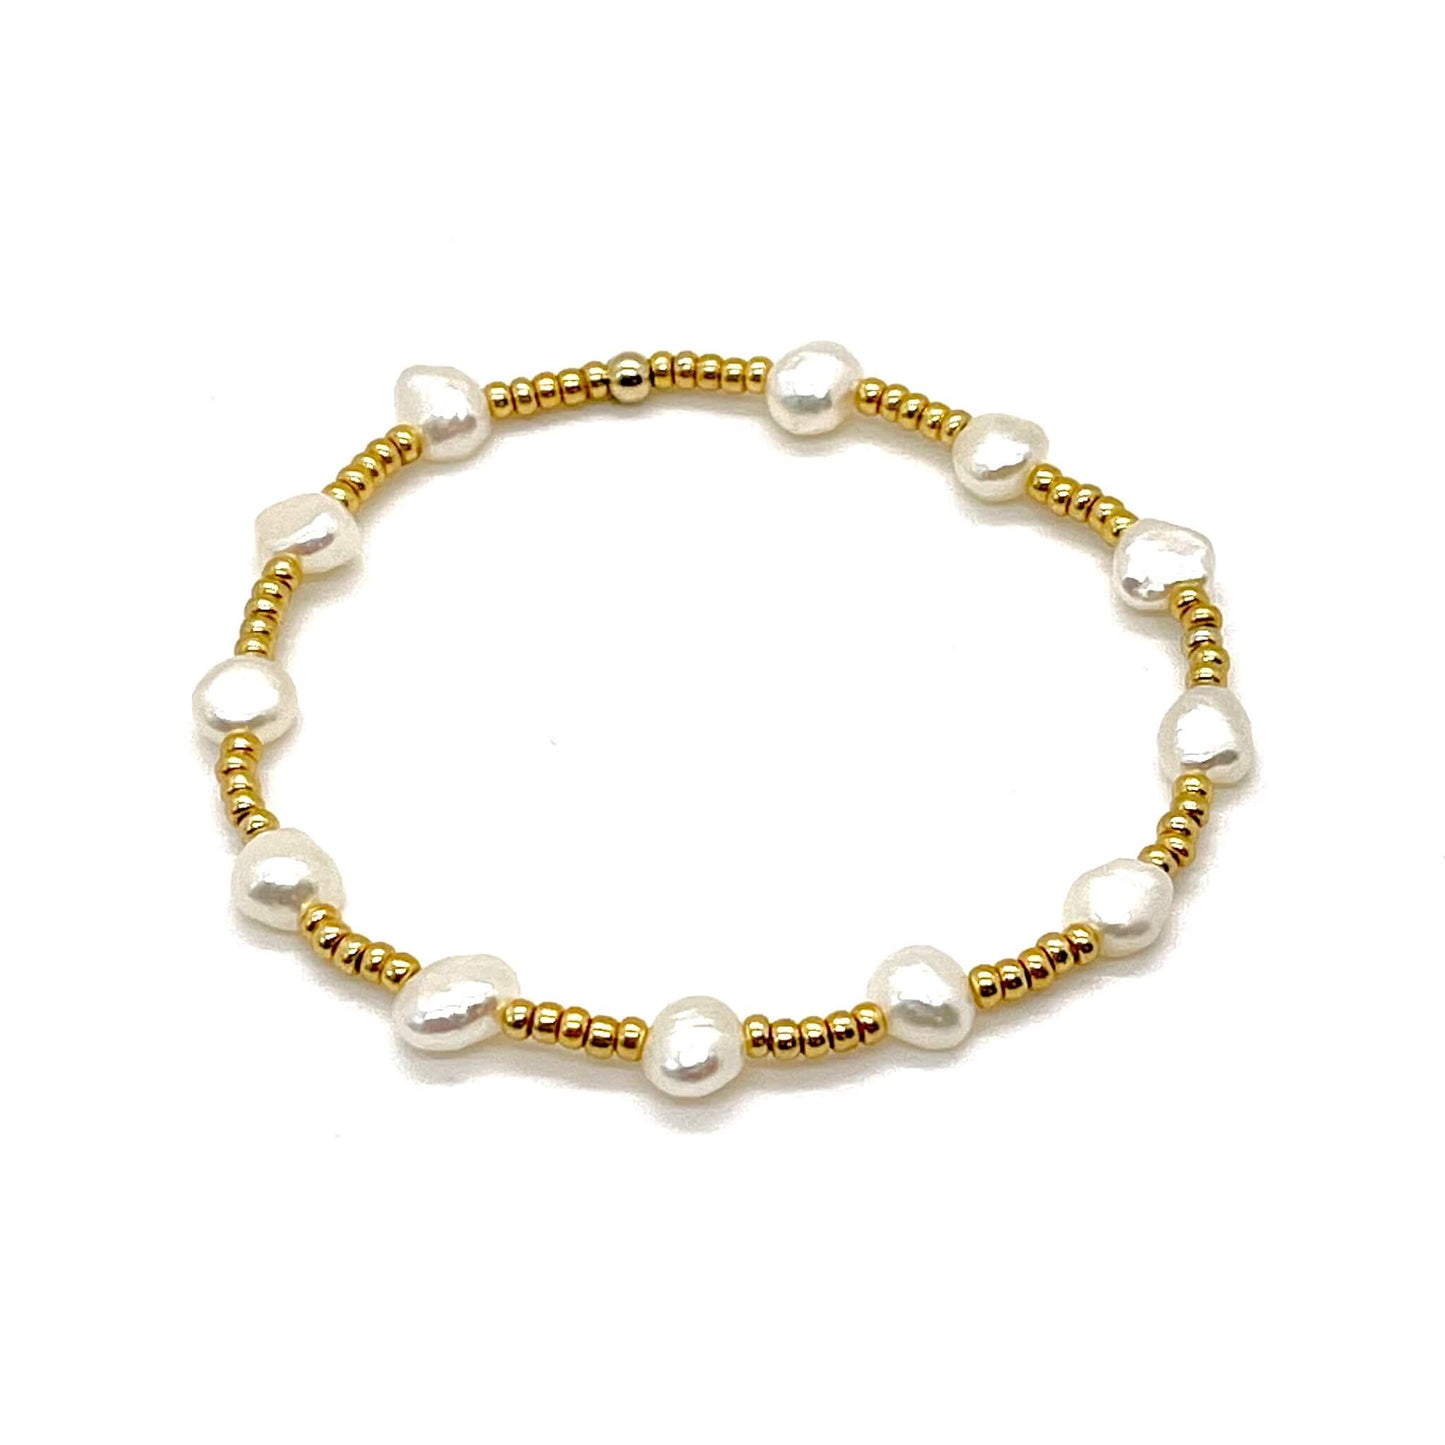 Freshwater pearl stretch bracelet with flat bottom pearls and small gold tone glass seed beads.